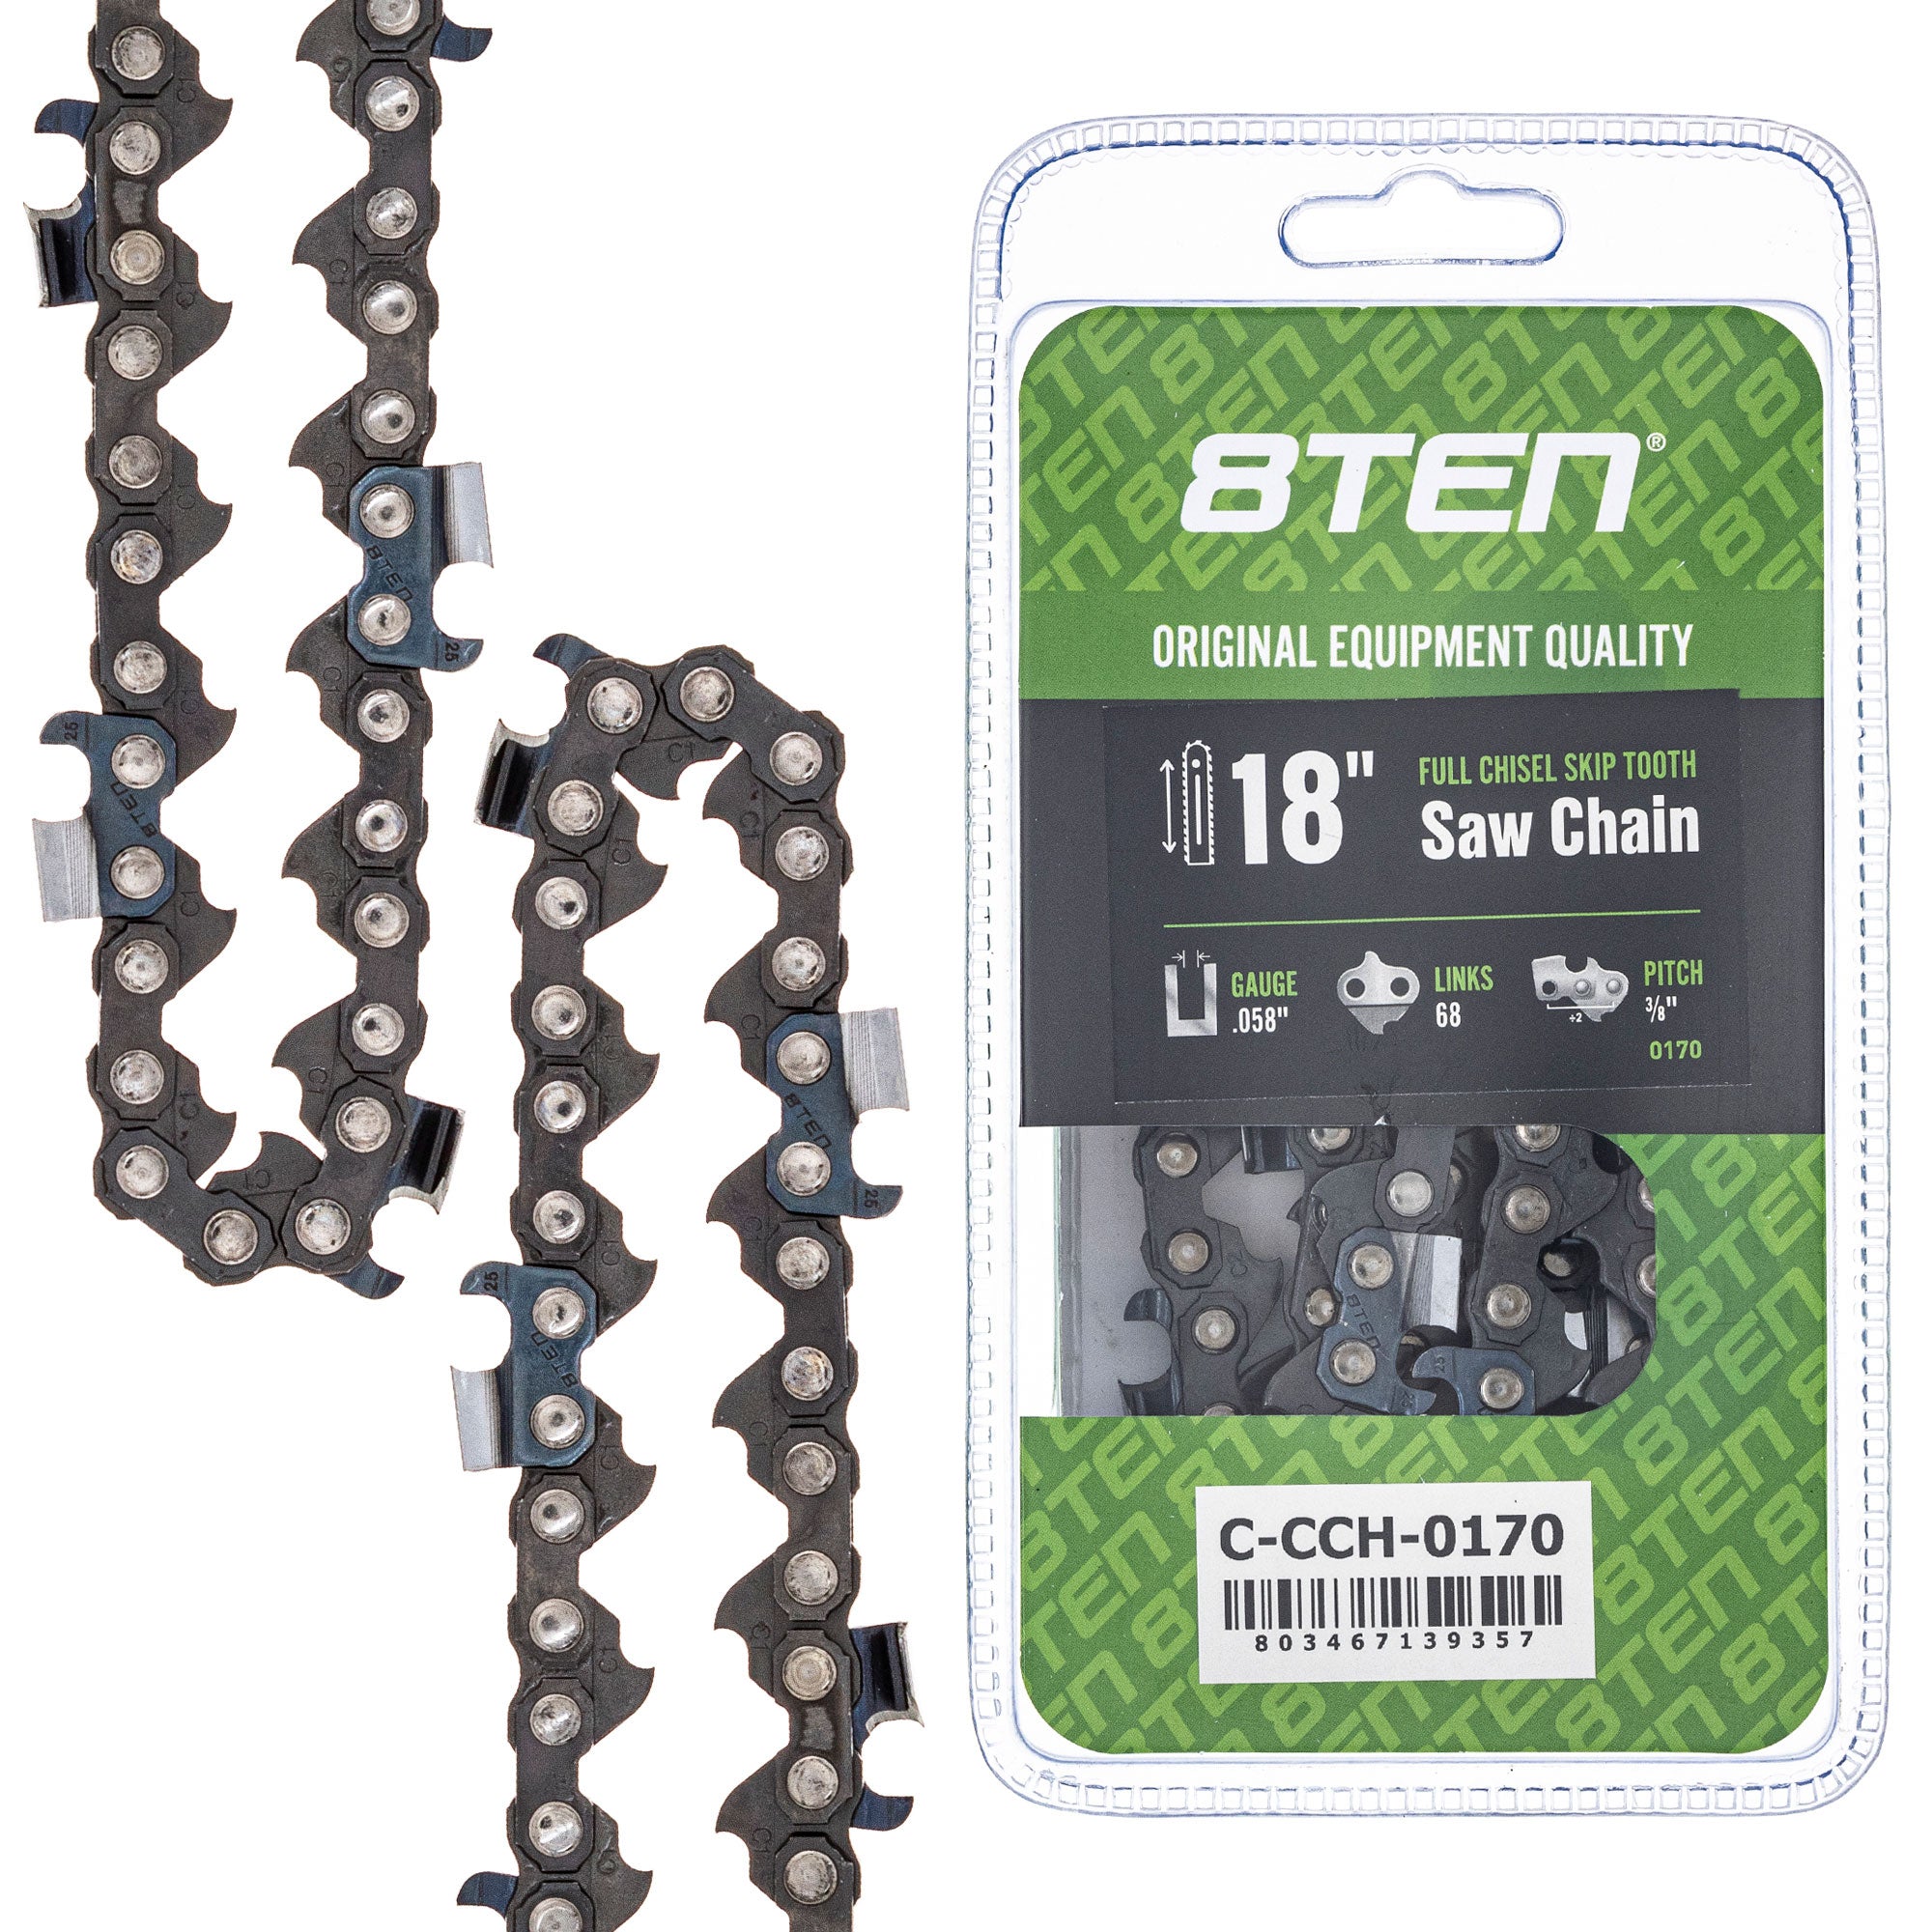 8TEN MK1010433 Guide Bar & Chain for S-65 S-55 S-50 R-440